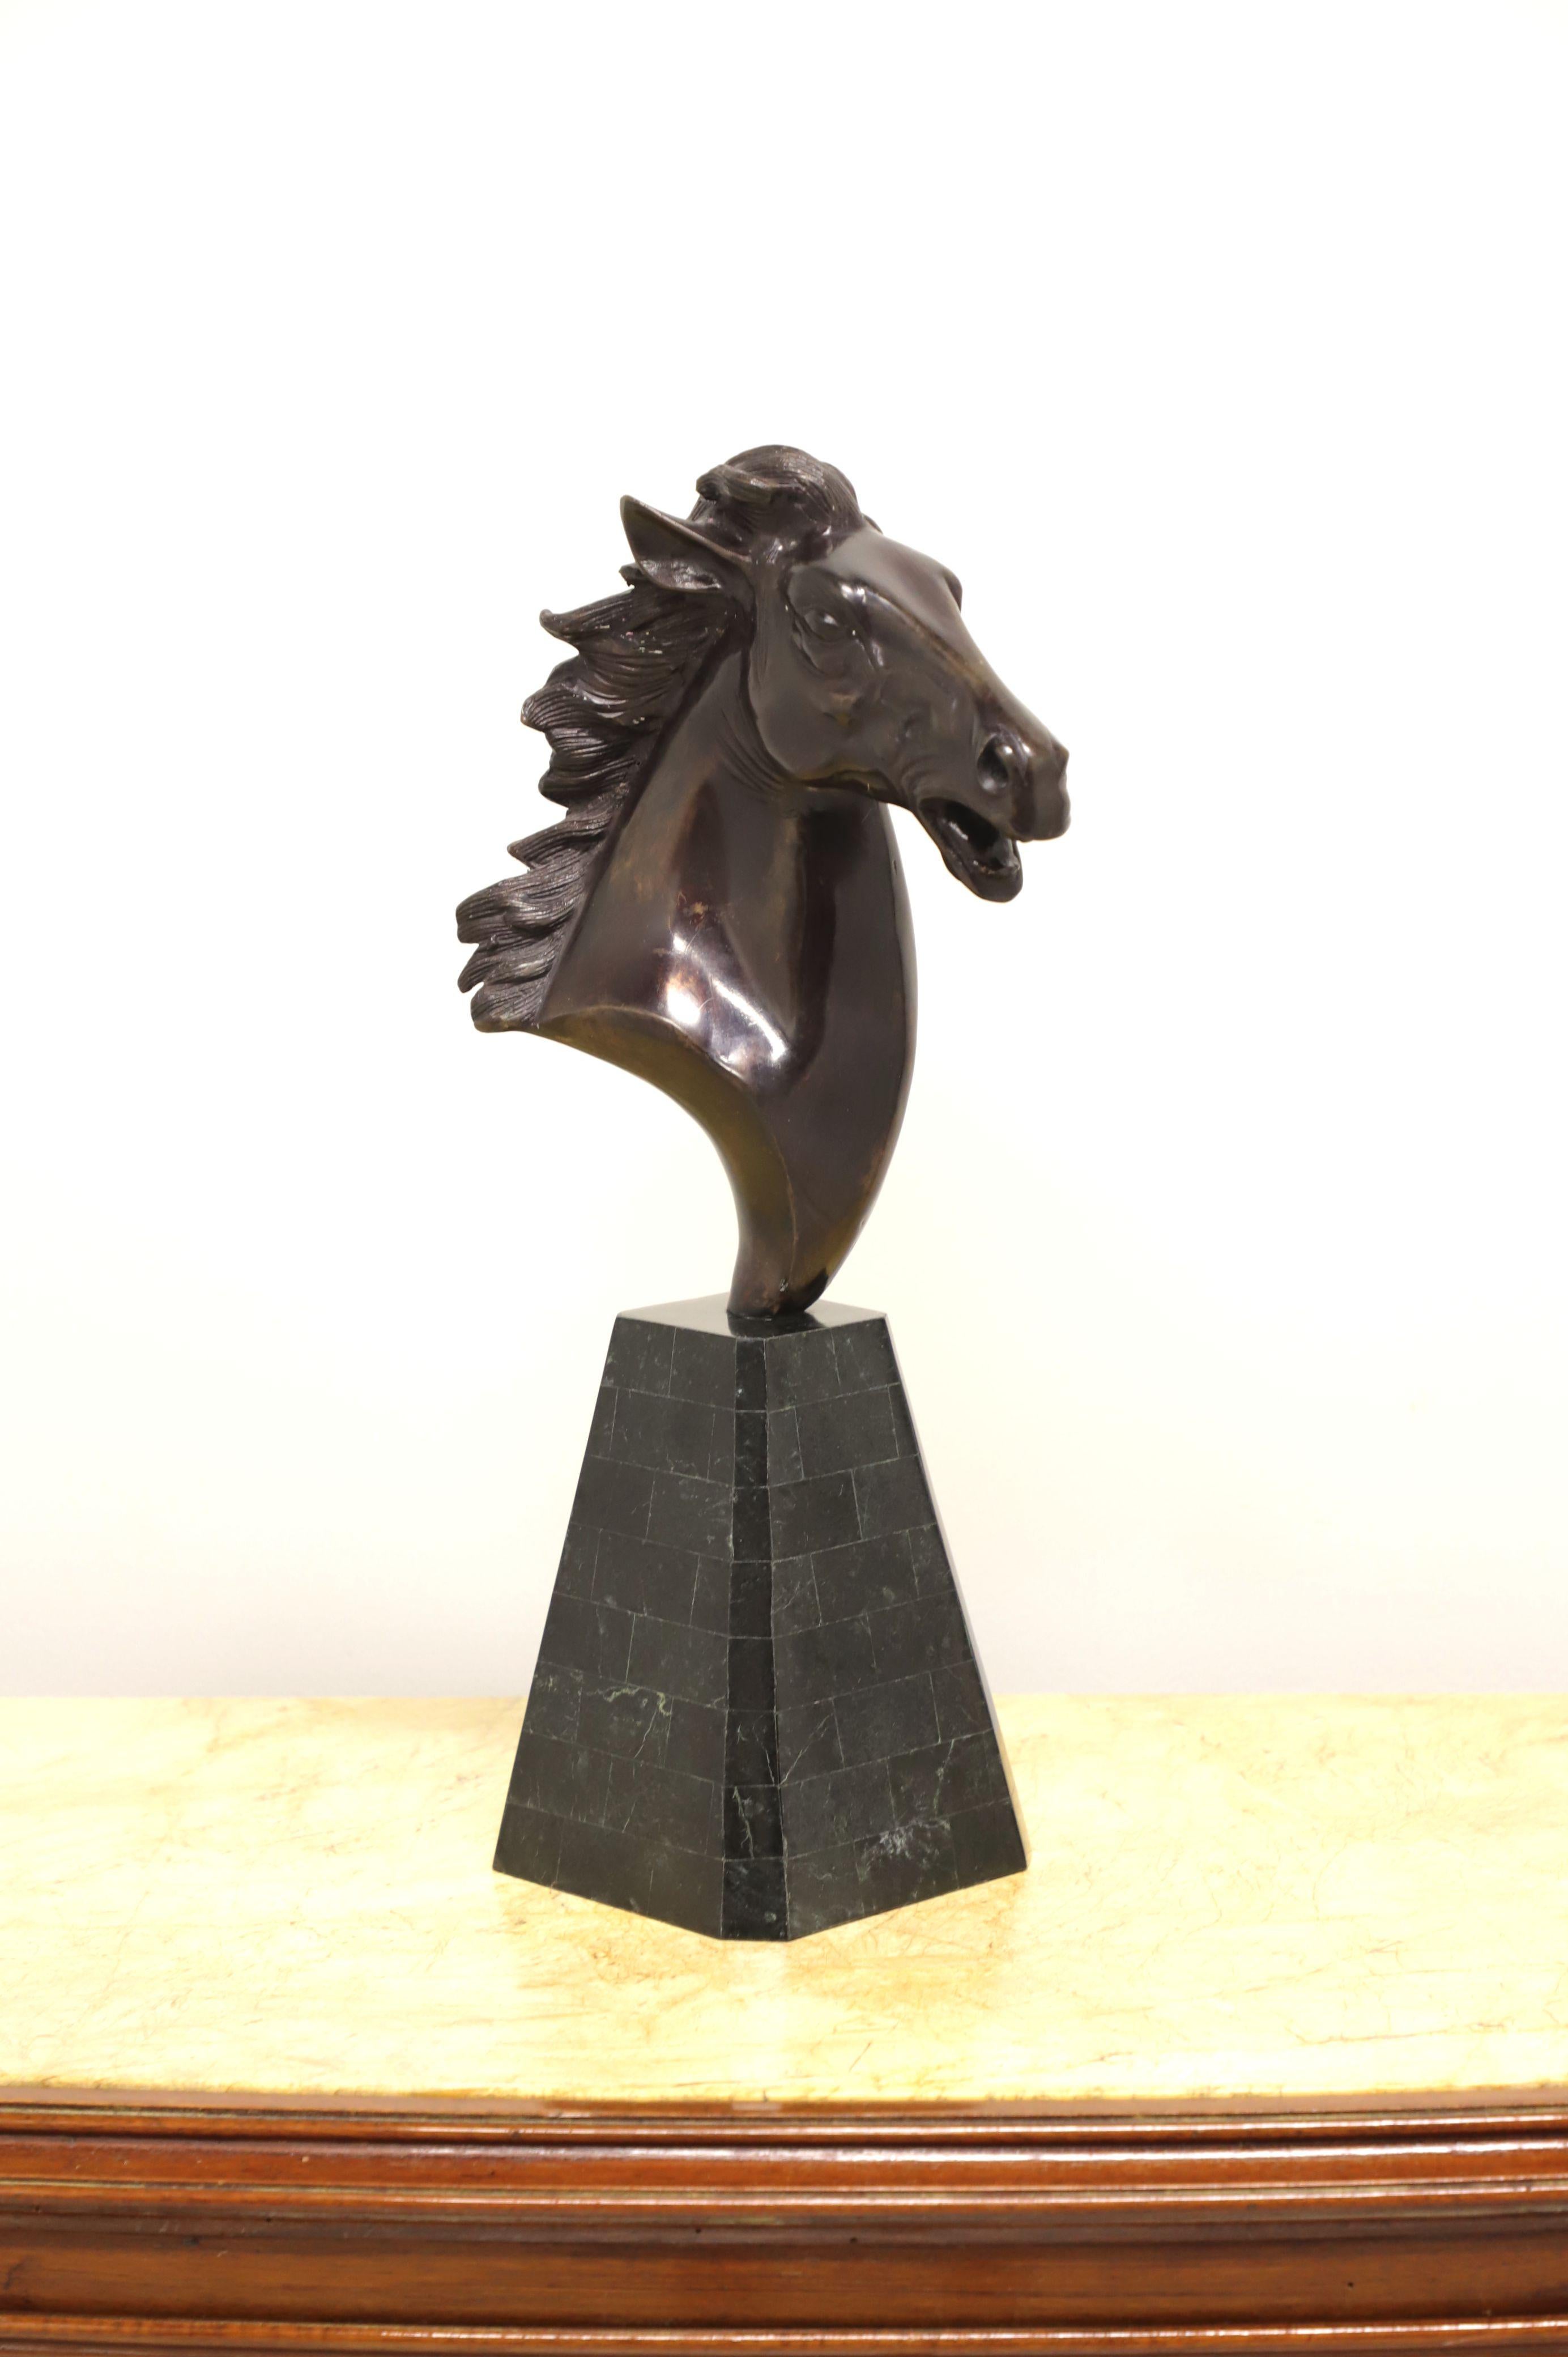 A table top sculpture in metal depicting a horse head by Maitland Smith. Sculpted metal horse head on a tessellated black marble base. Made in the Philippines, in the late 20th century.

Measures: 6.25 W 6.25 D 20.5 H, Weighs approximately: 10